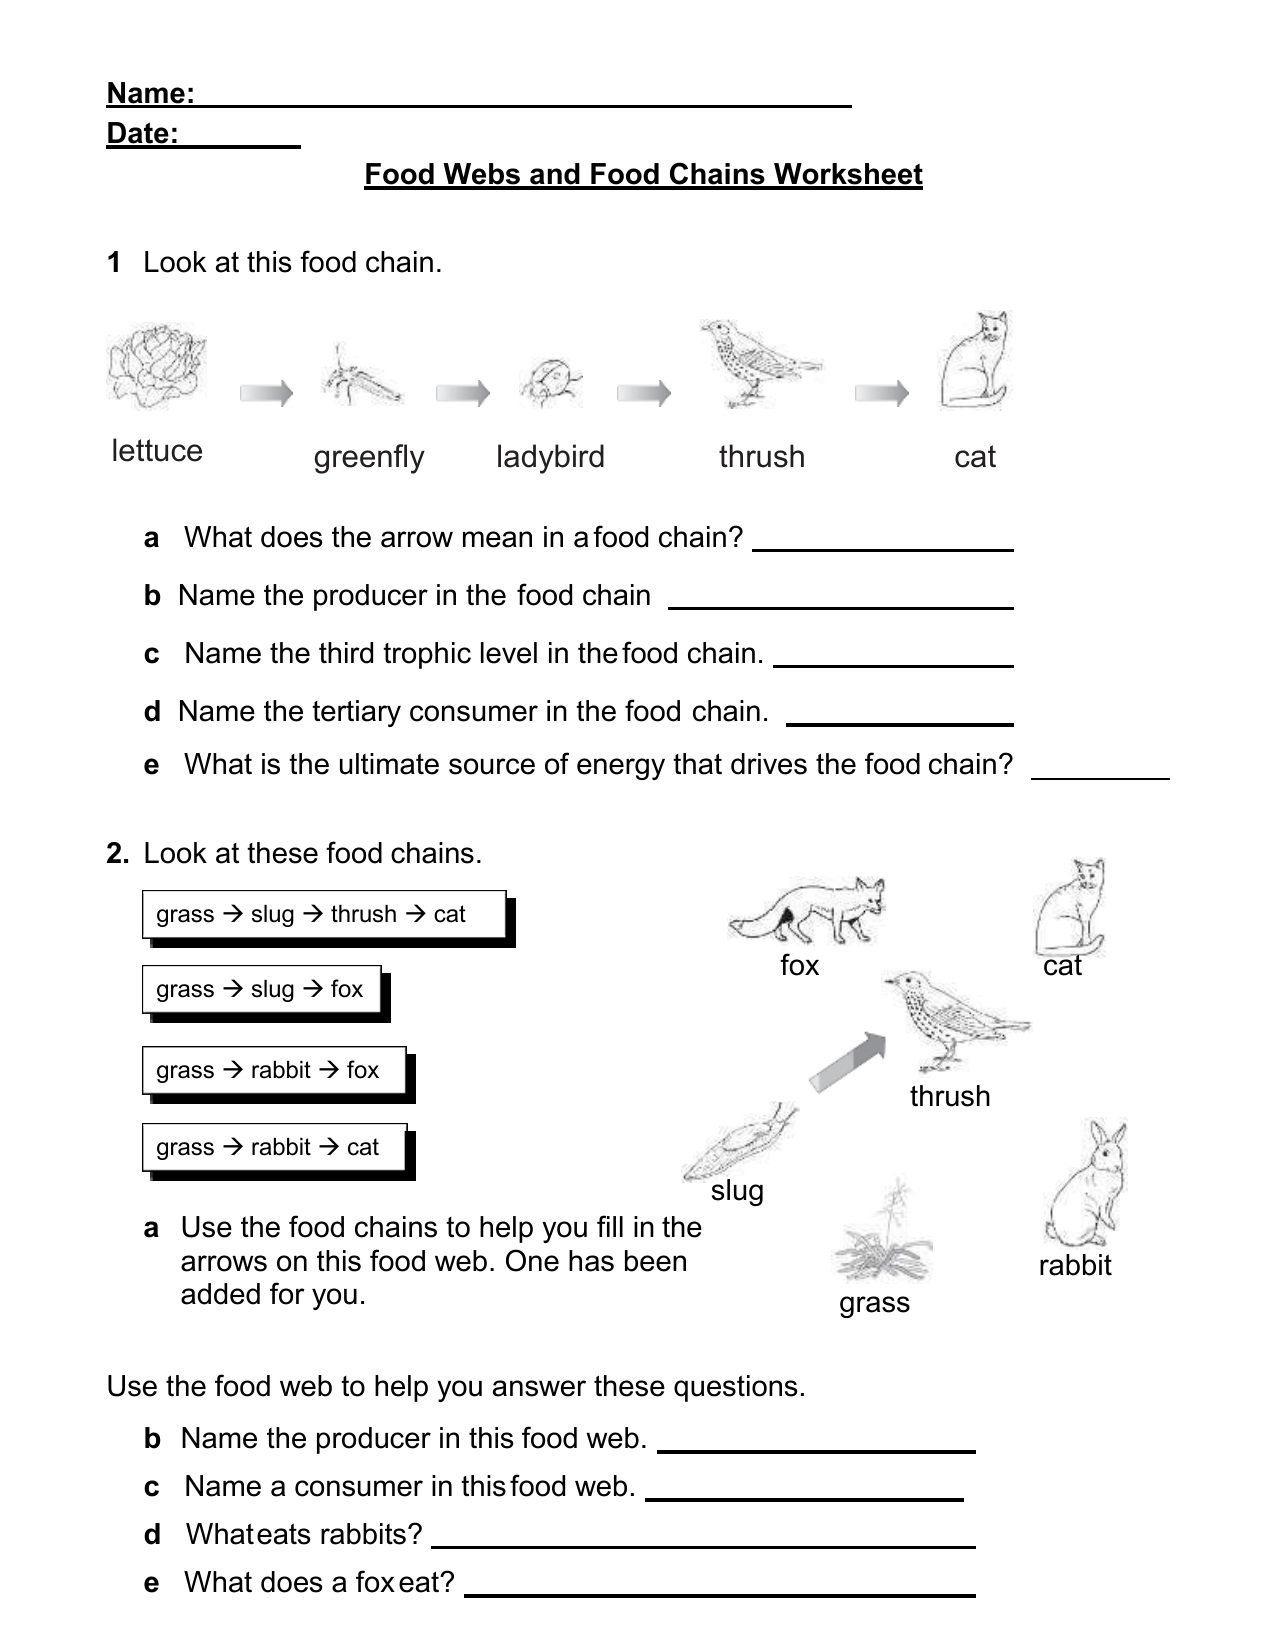 food webs and food chains worksheet answer key backpage